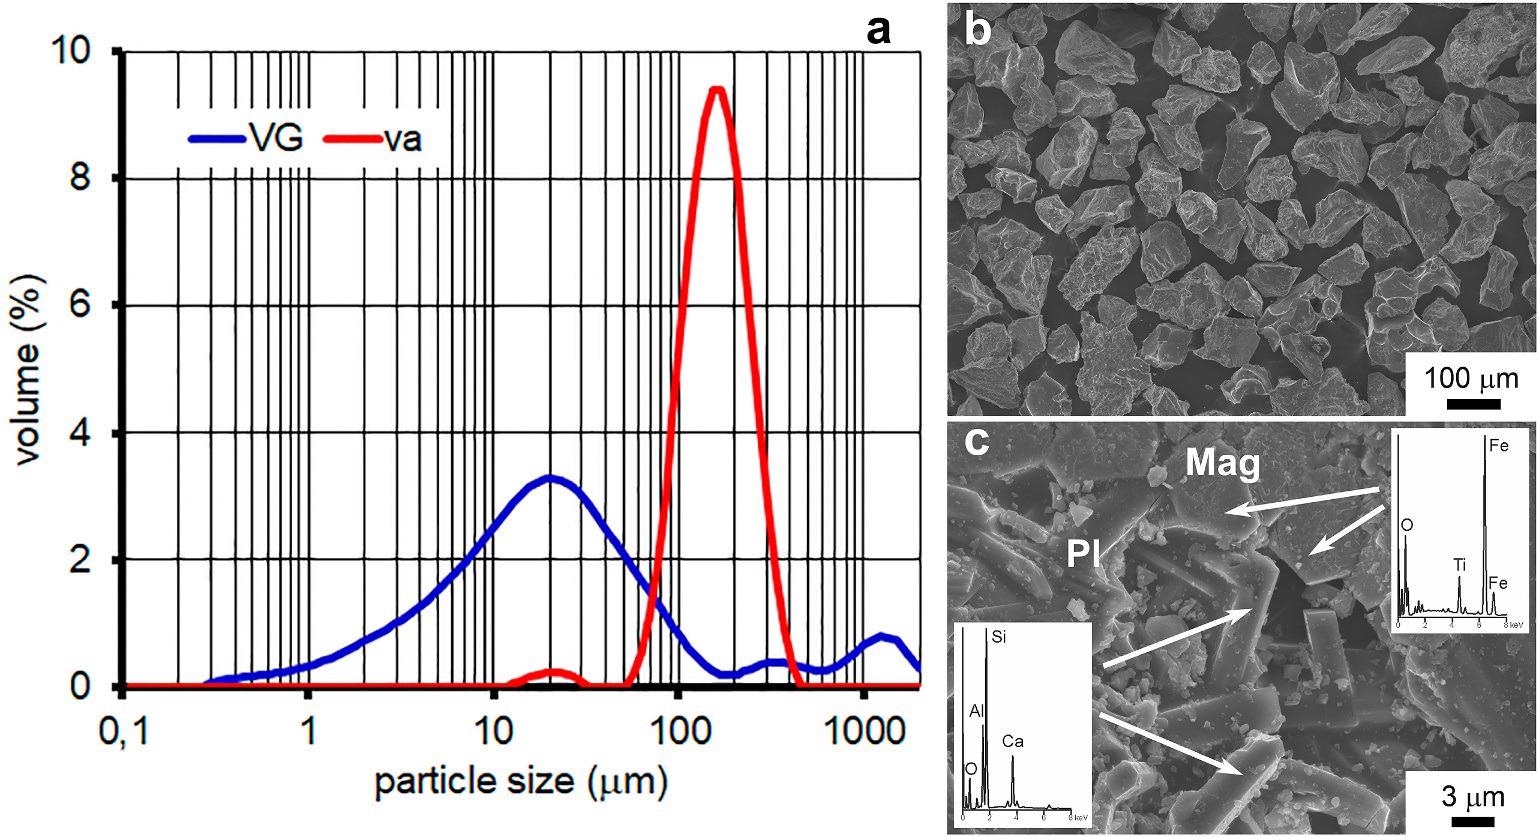 a) grain-size distribution curves for the clayey material (VG) and the volcanic ash (va); b) general view of ash particles under FESEM; c) detailed image of a fragment in which Ca-plagioclase (Pl) and Ti-magnetite crystals (Mag) have been identified (see EDS spectra). Mineral abbreviations after Whitney and Evans [79].